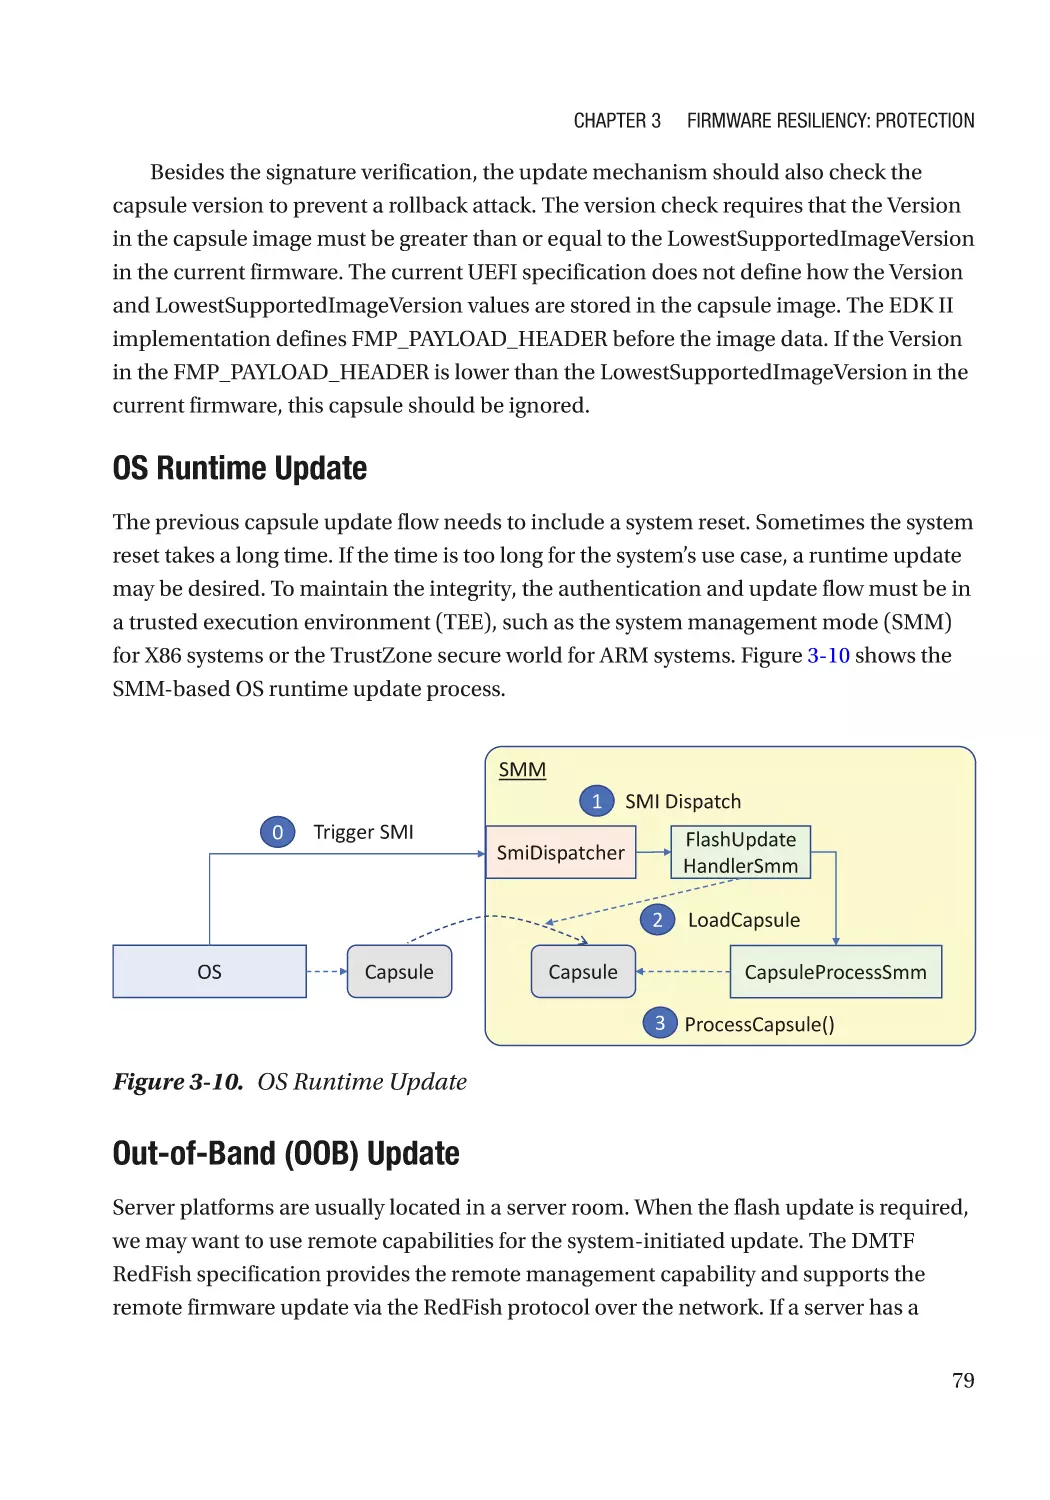 OS Runtime Update
Out-of-Band (OOB) Update